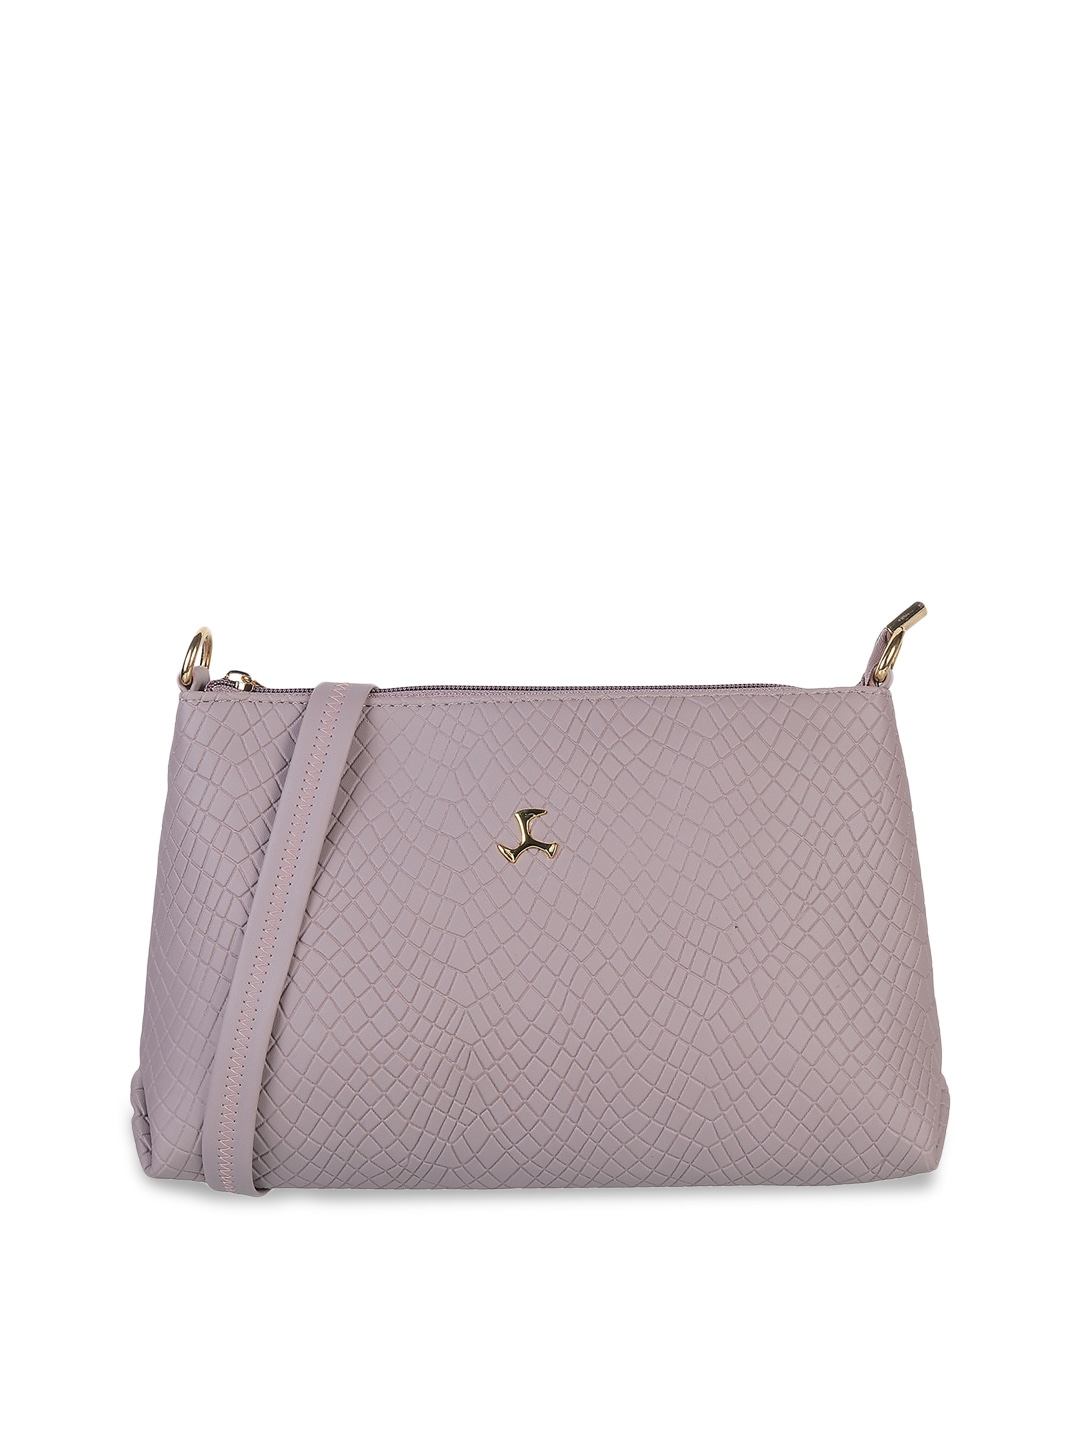 Mochi Purple Textured PU Structured Sling Bag with Quilted Price in India